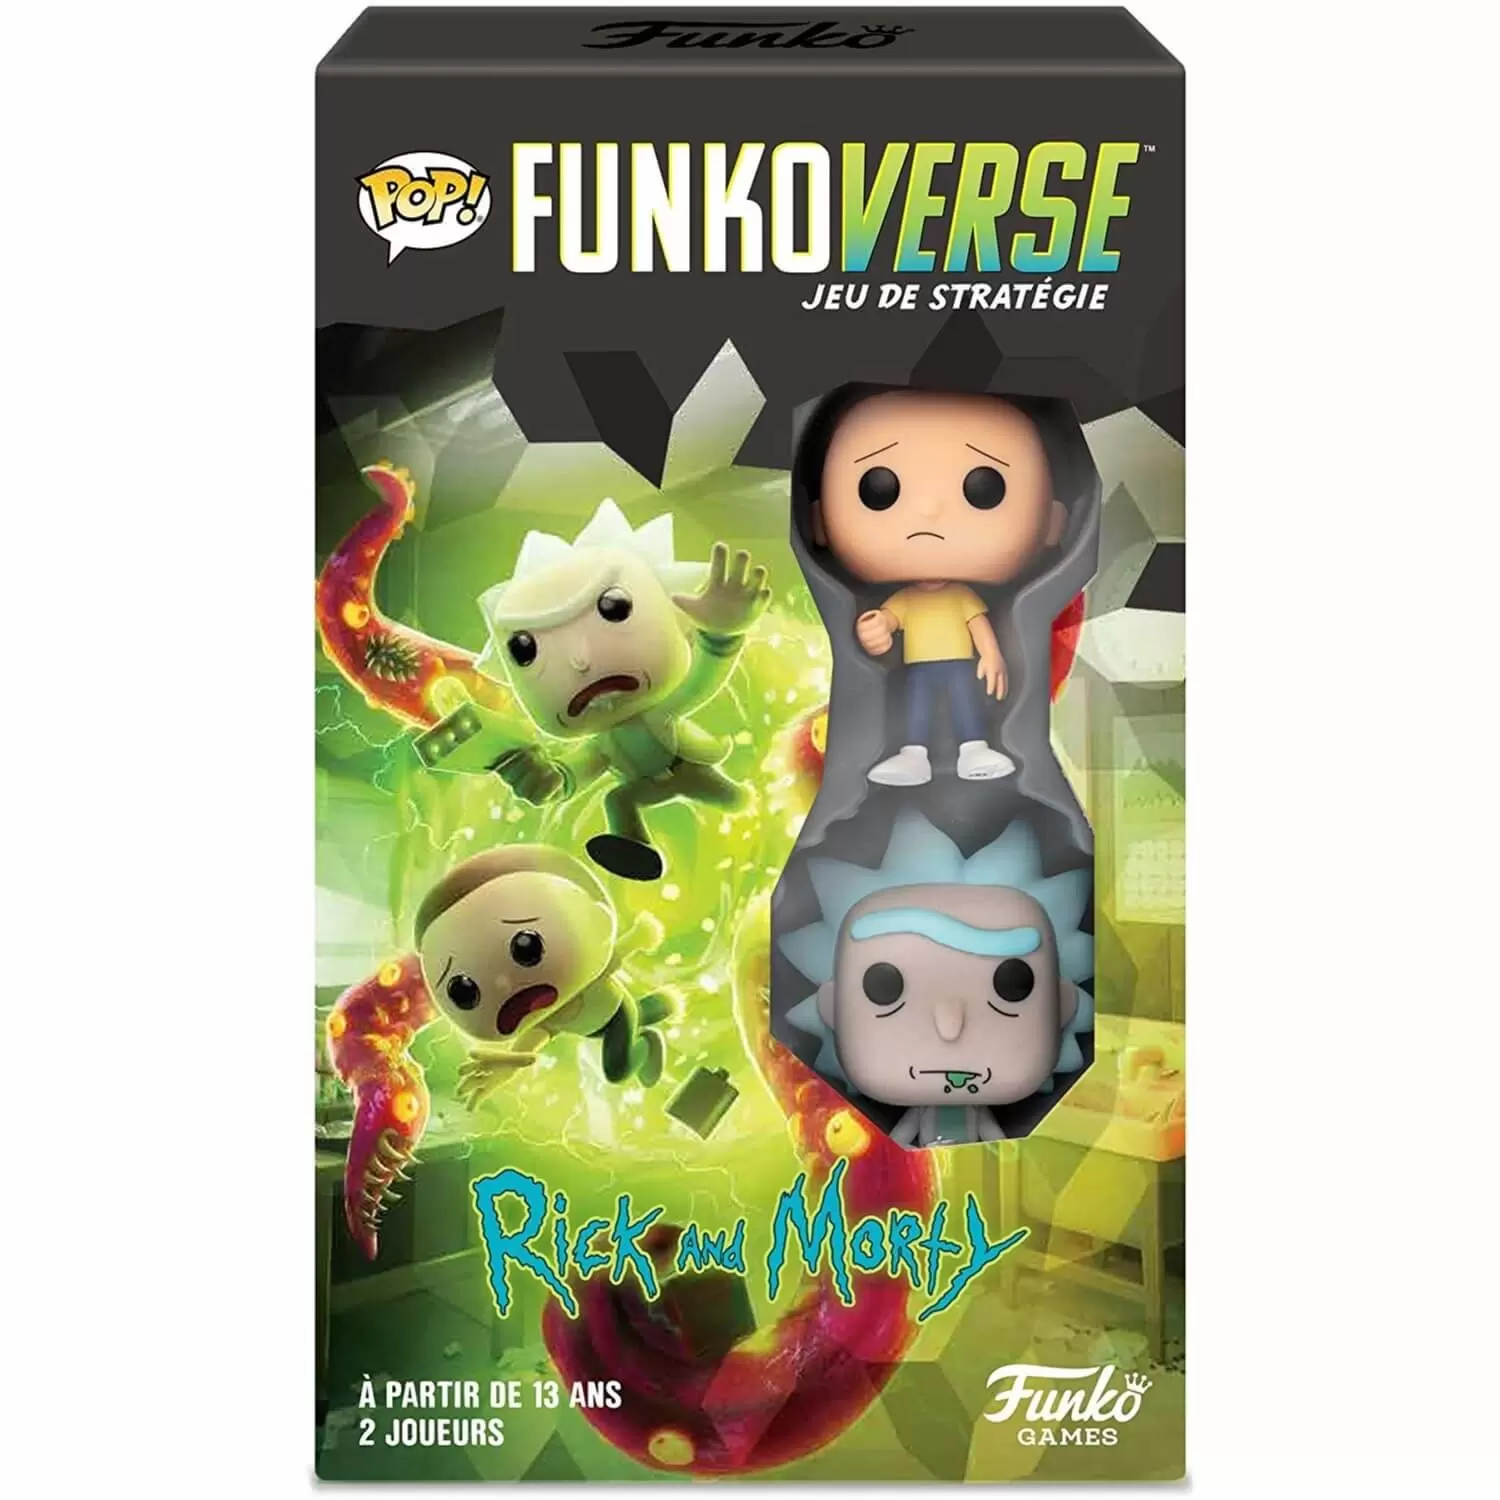 Funko Games - Funkoverse - Rick and Morty Strategy Game 2 Players